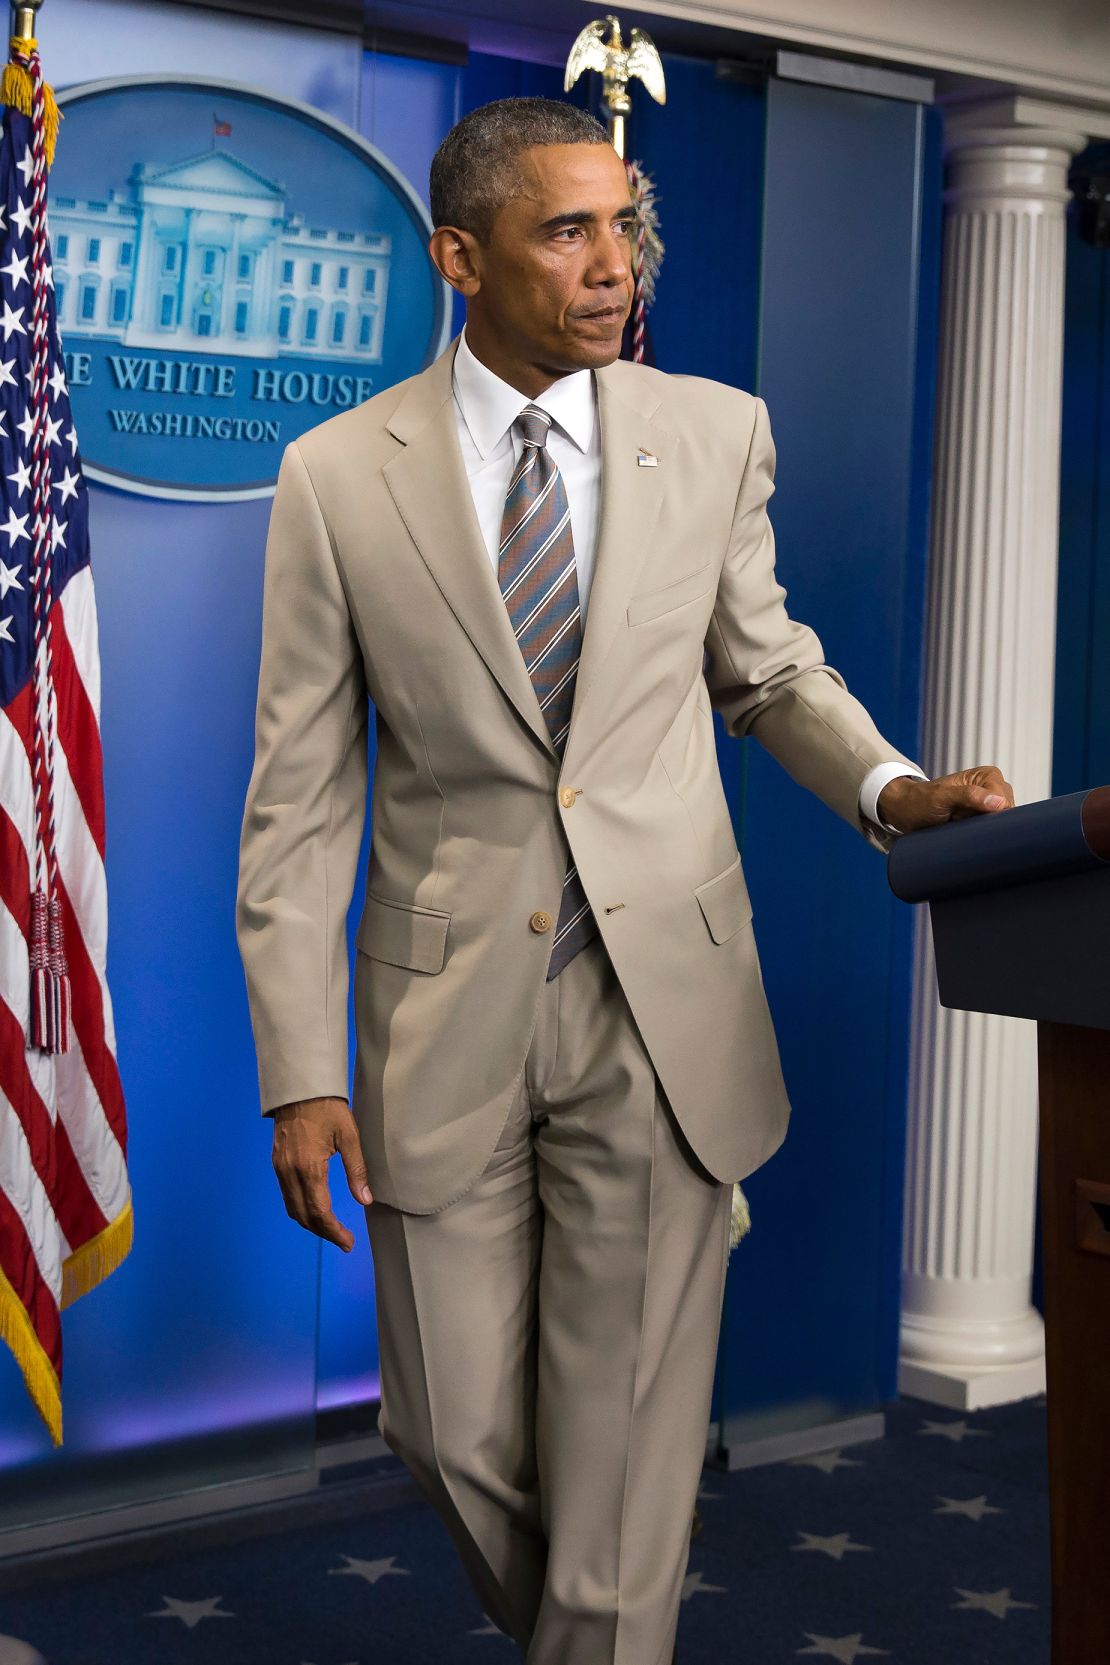 Greenfield made countless suits for President Barack Obama, including the infamous tan suit that caused uproar in 2014. The suit, a departure from the President’s usual charcoal or navy ensembles, was the source of sustained, headline-grabbing controversy.